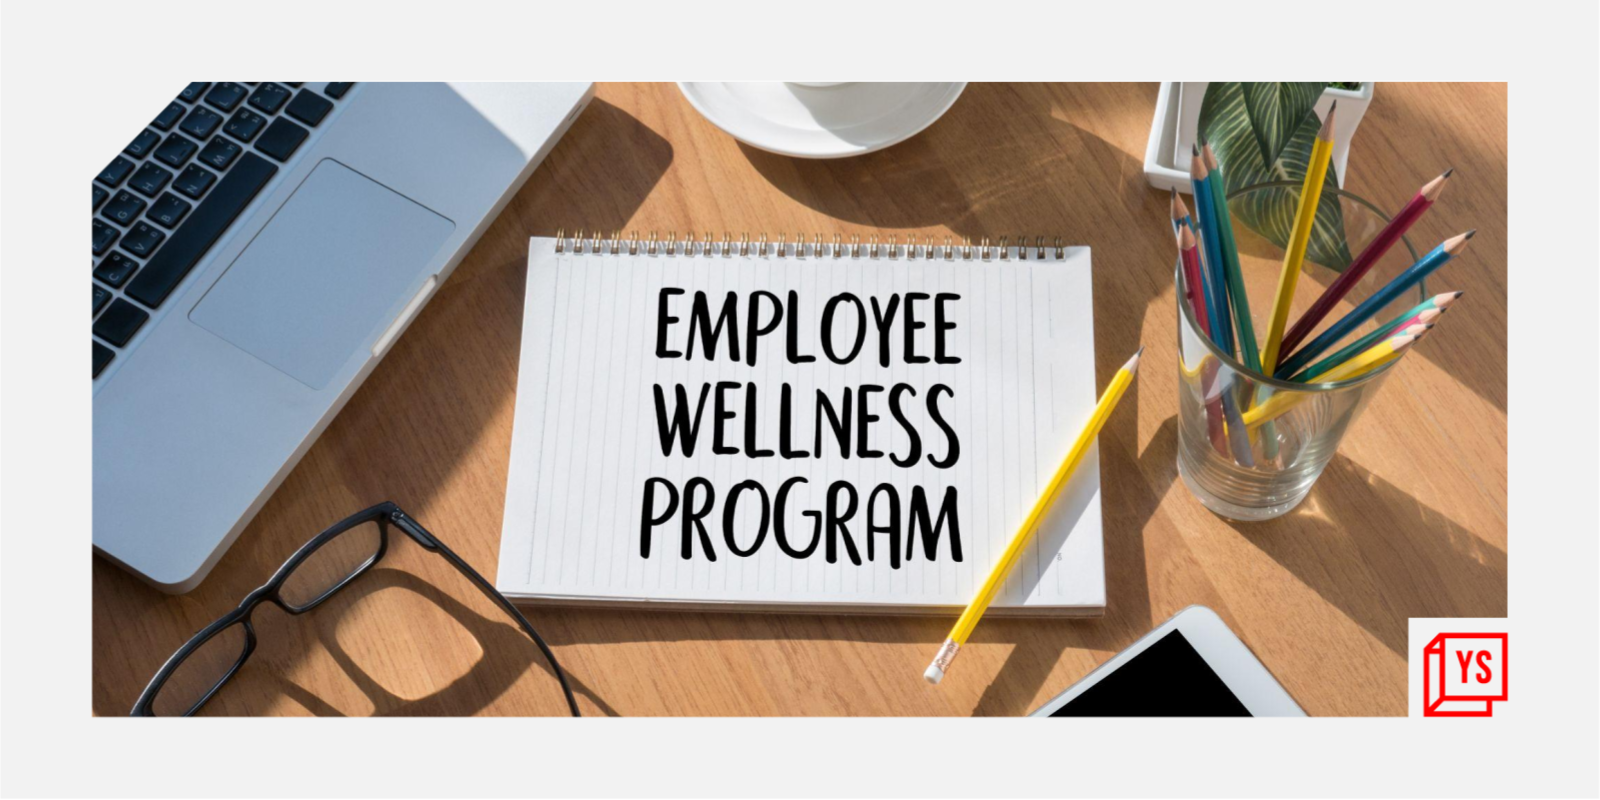 Corporate wellness programmes: Why are companies getting it wrong?

